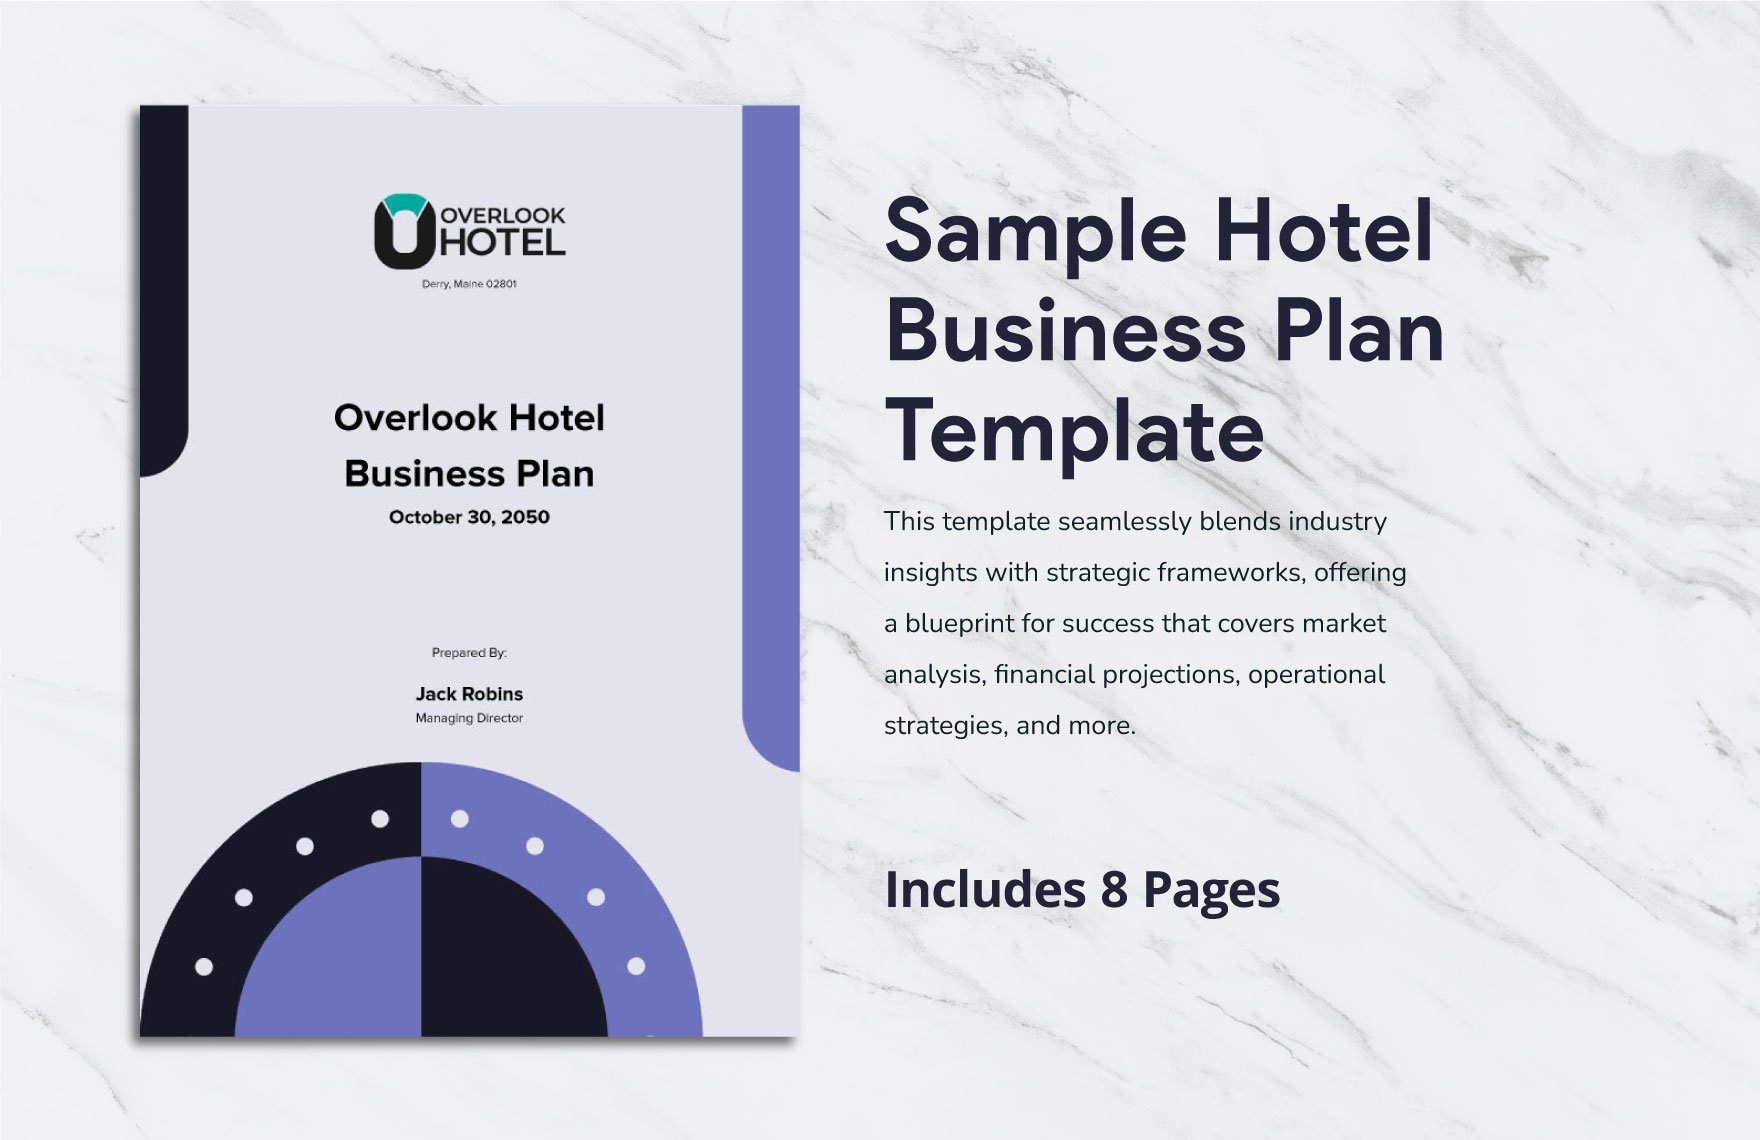 Sample Hotel Business Plan Template